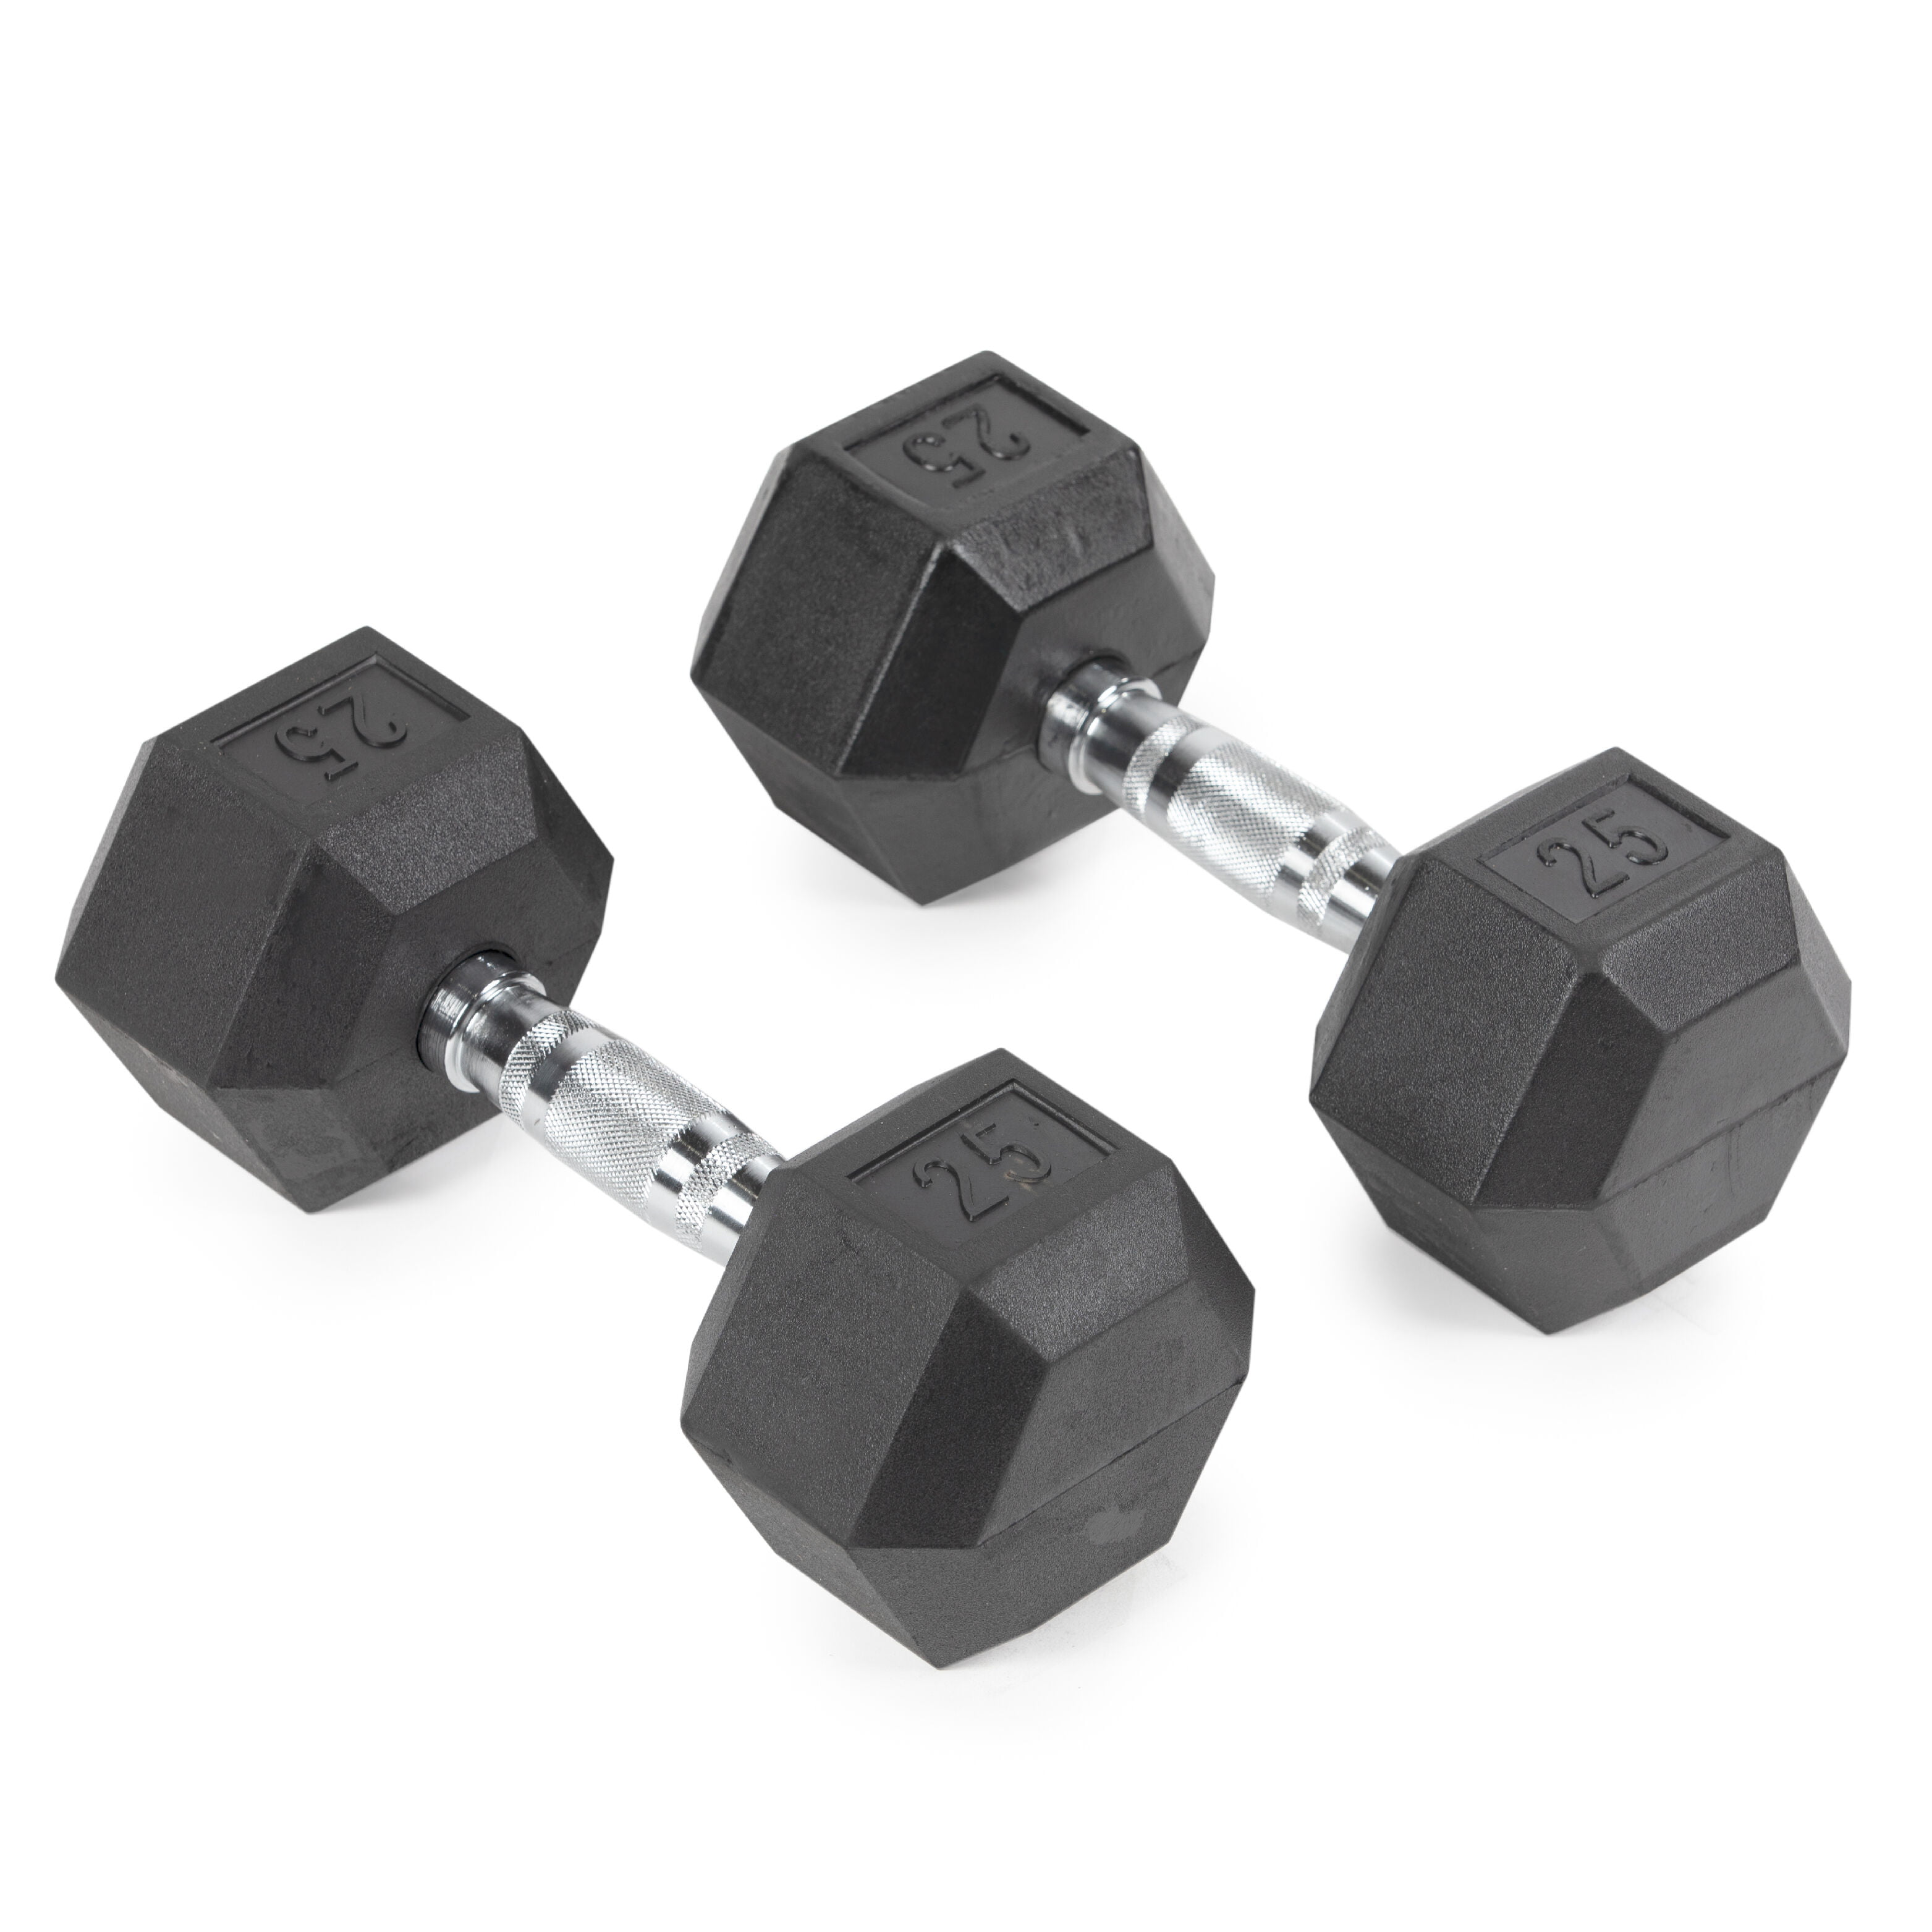 NEW Weider 25lb Dumbbells Pair Rubber Coated Hex Set 50lb Total Free Shipping 